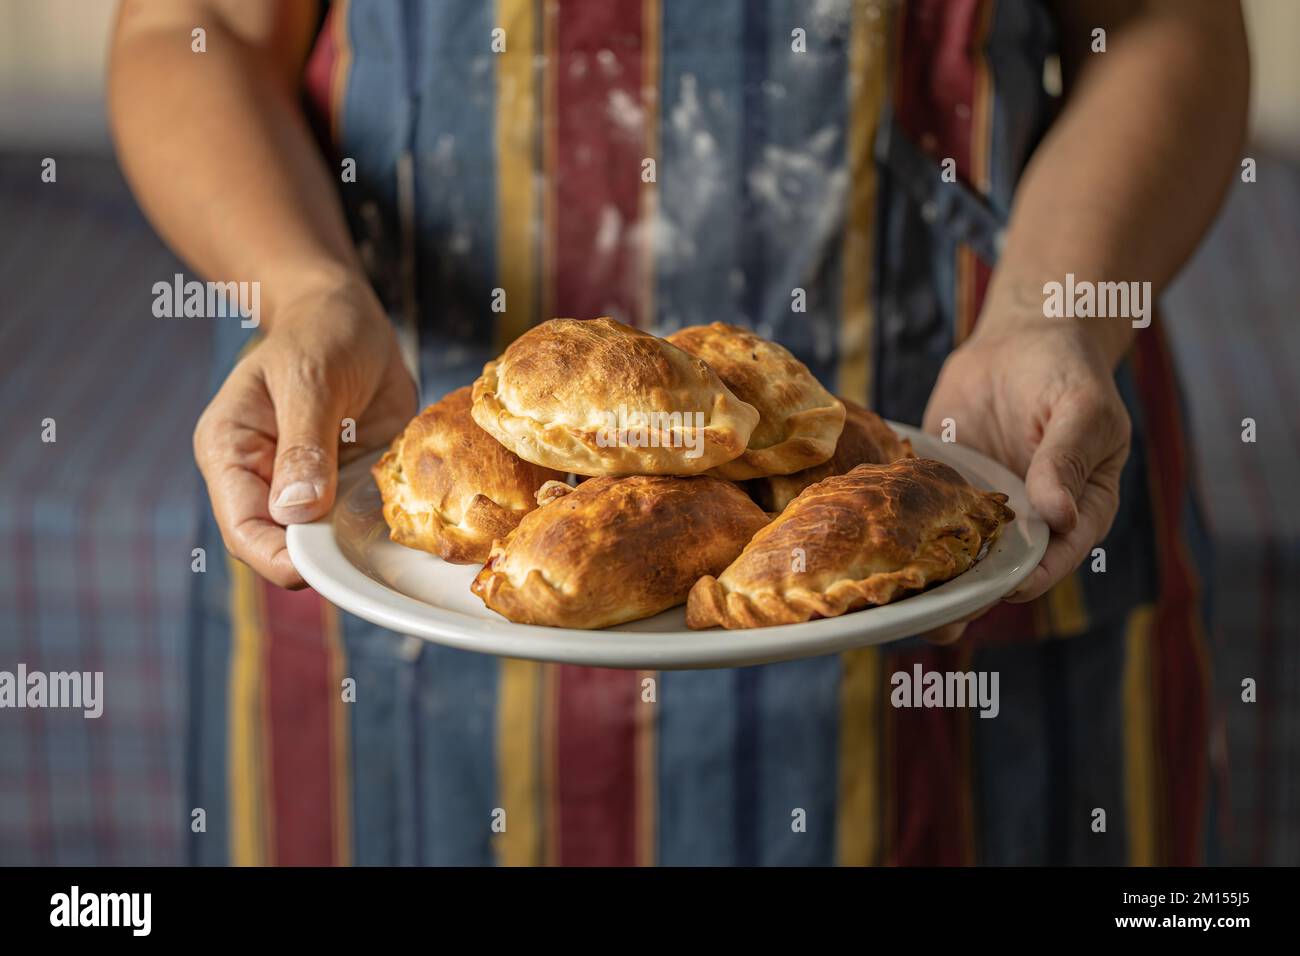 Woman in an apron stained with flour holding a tray with Argentine empanadas. Stock Photo